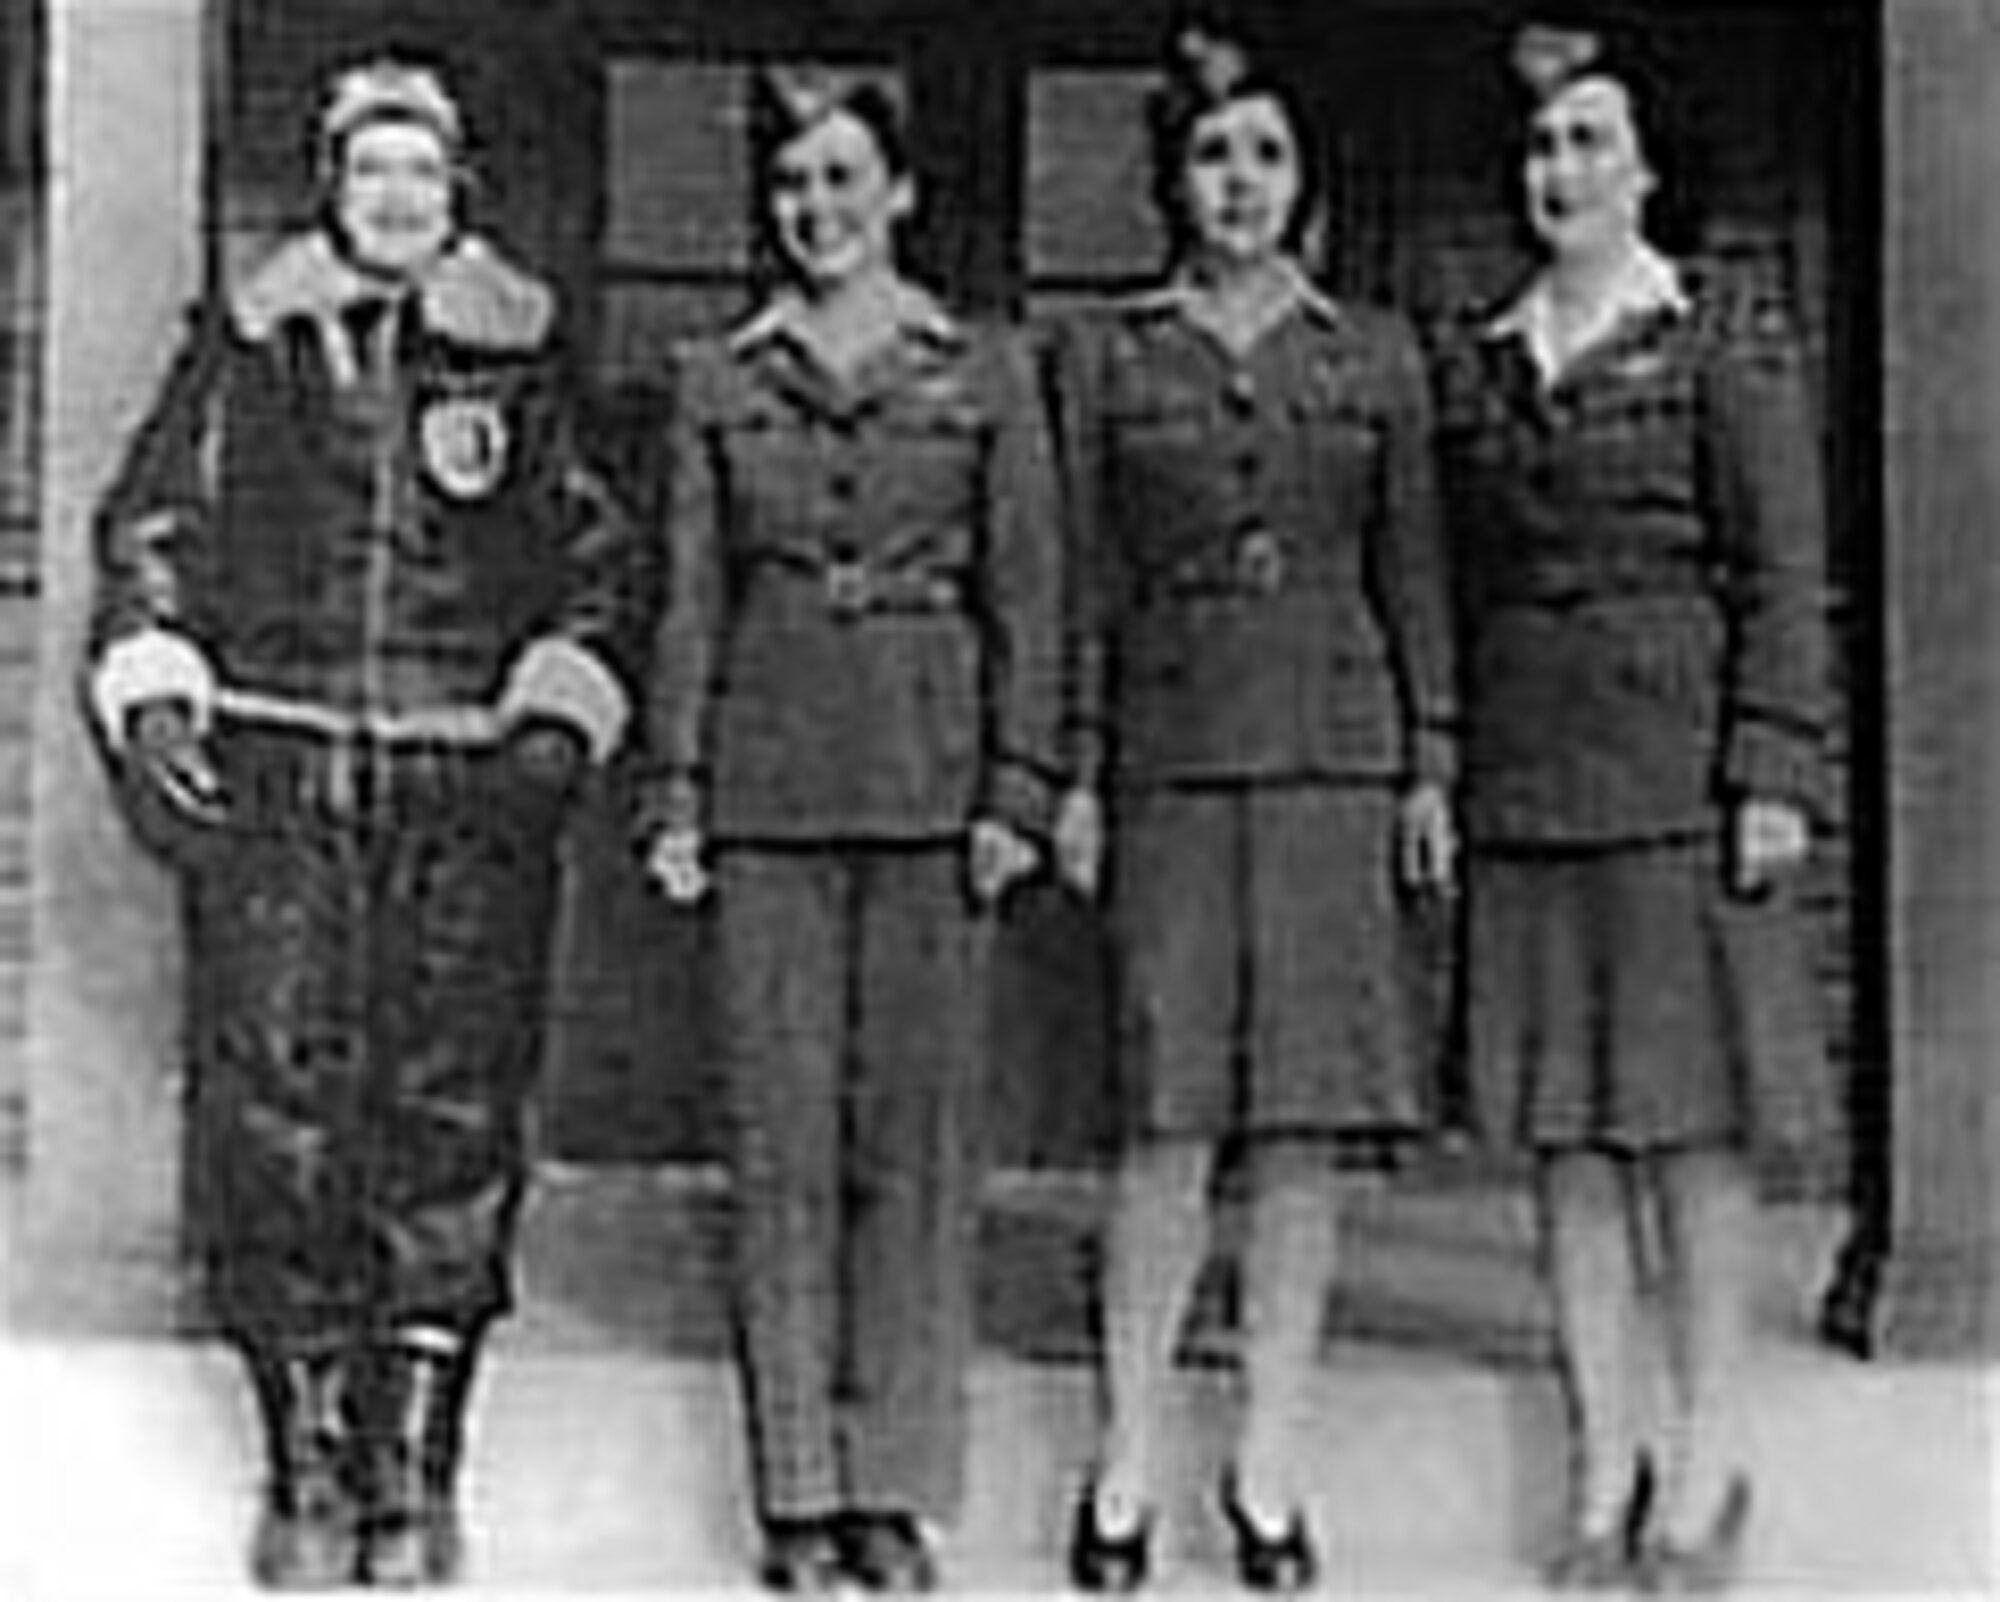 WAFS mdoel various uniforms. From left are Delphine Bohn in two piece winter flying suit; Evelyn Sharp wearing flying and traveling outfit of tan working shirt, gray jacket and trousers; Bernice Batton in same outfit but with dress skirt; and Barbara Erickson in white shirt with gray jacket and gray skirt worn for more formal occasions. (U.S. Air Force photo)